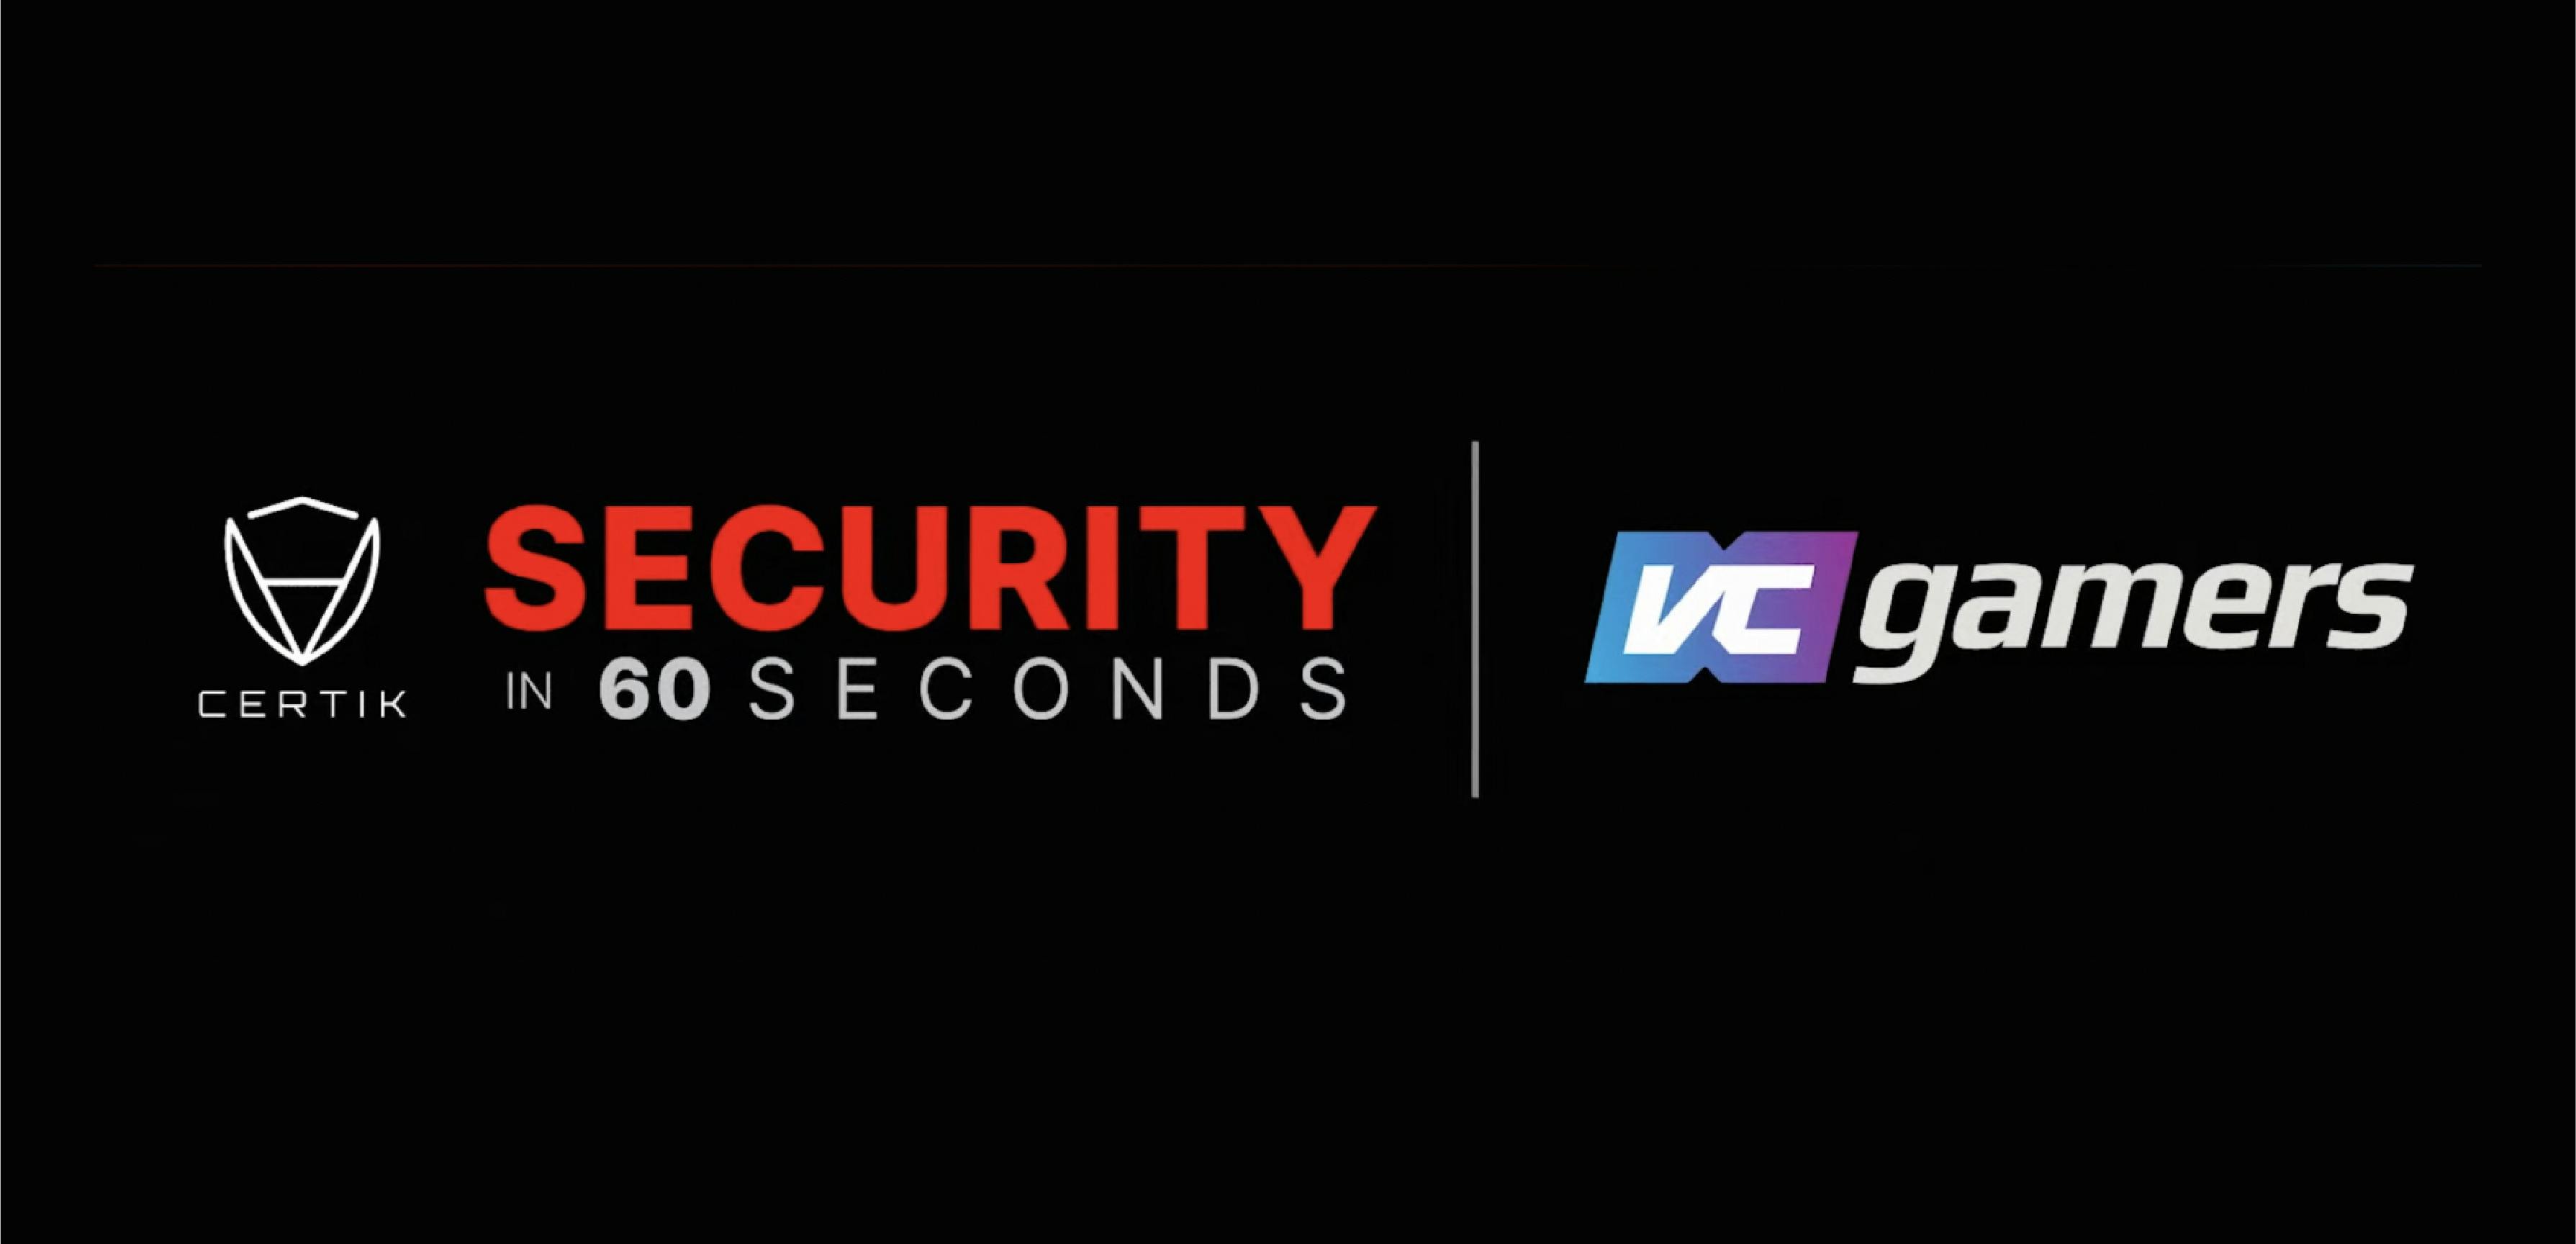 Security in 60 Seconds - VCGamers